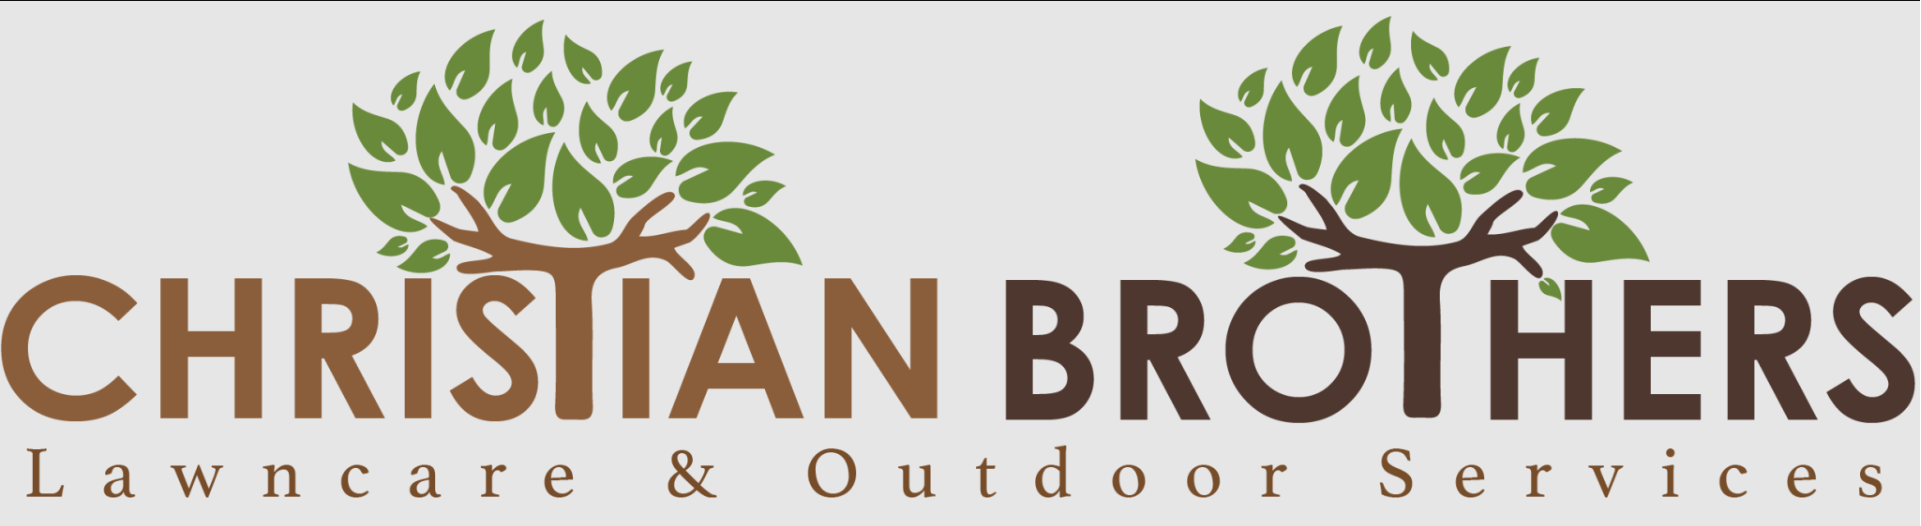 Christian Brothers Lawncare & Outdoor Services, Inc. Logo